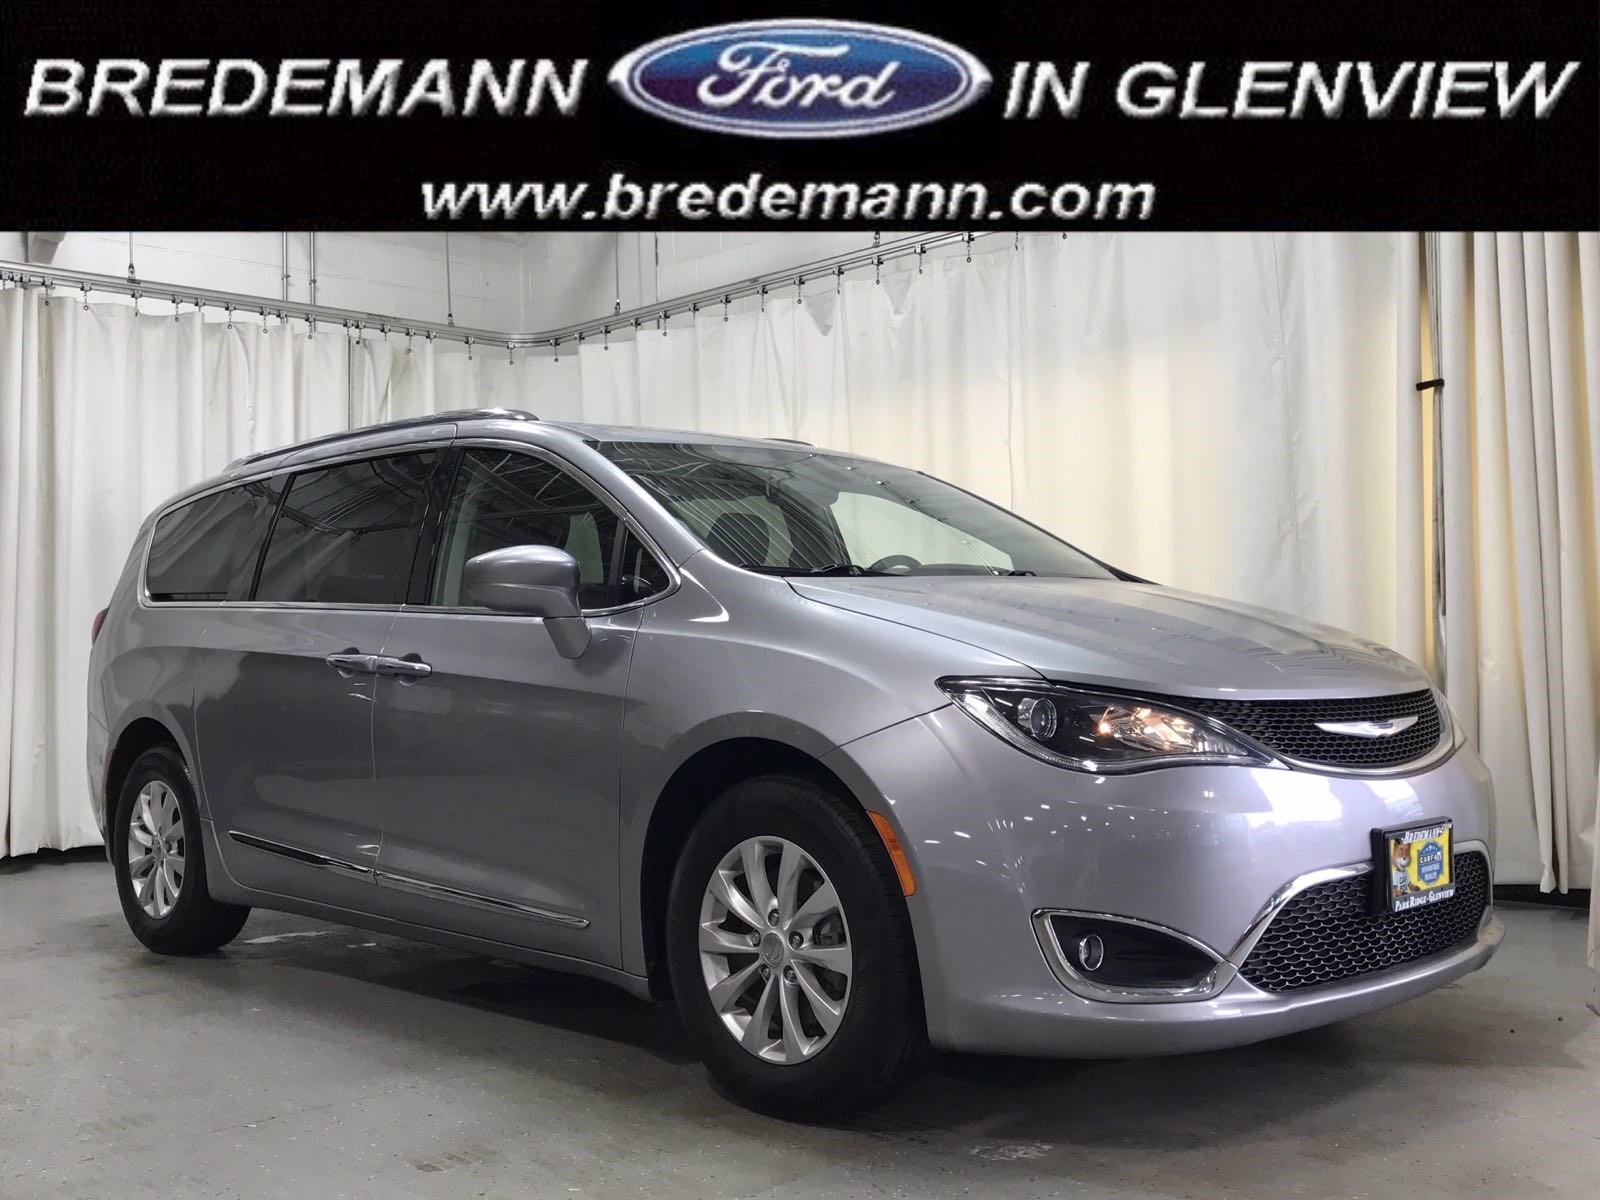 Used Chrysler Pacifica Glenview Il